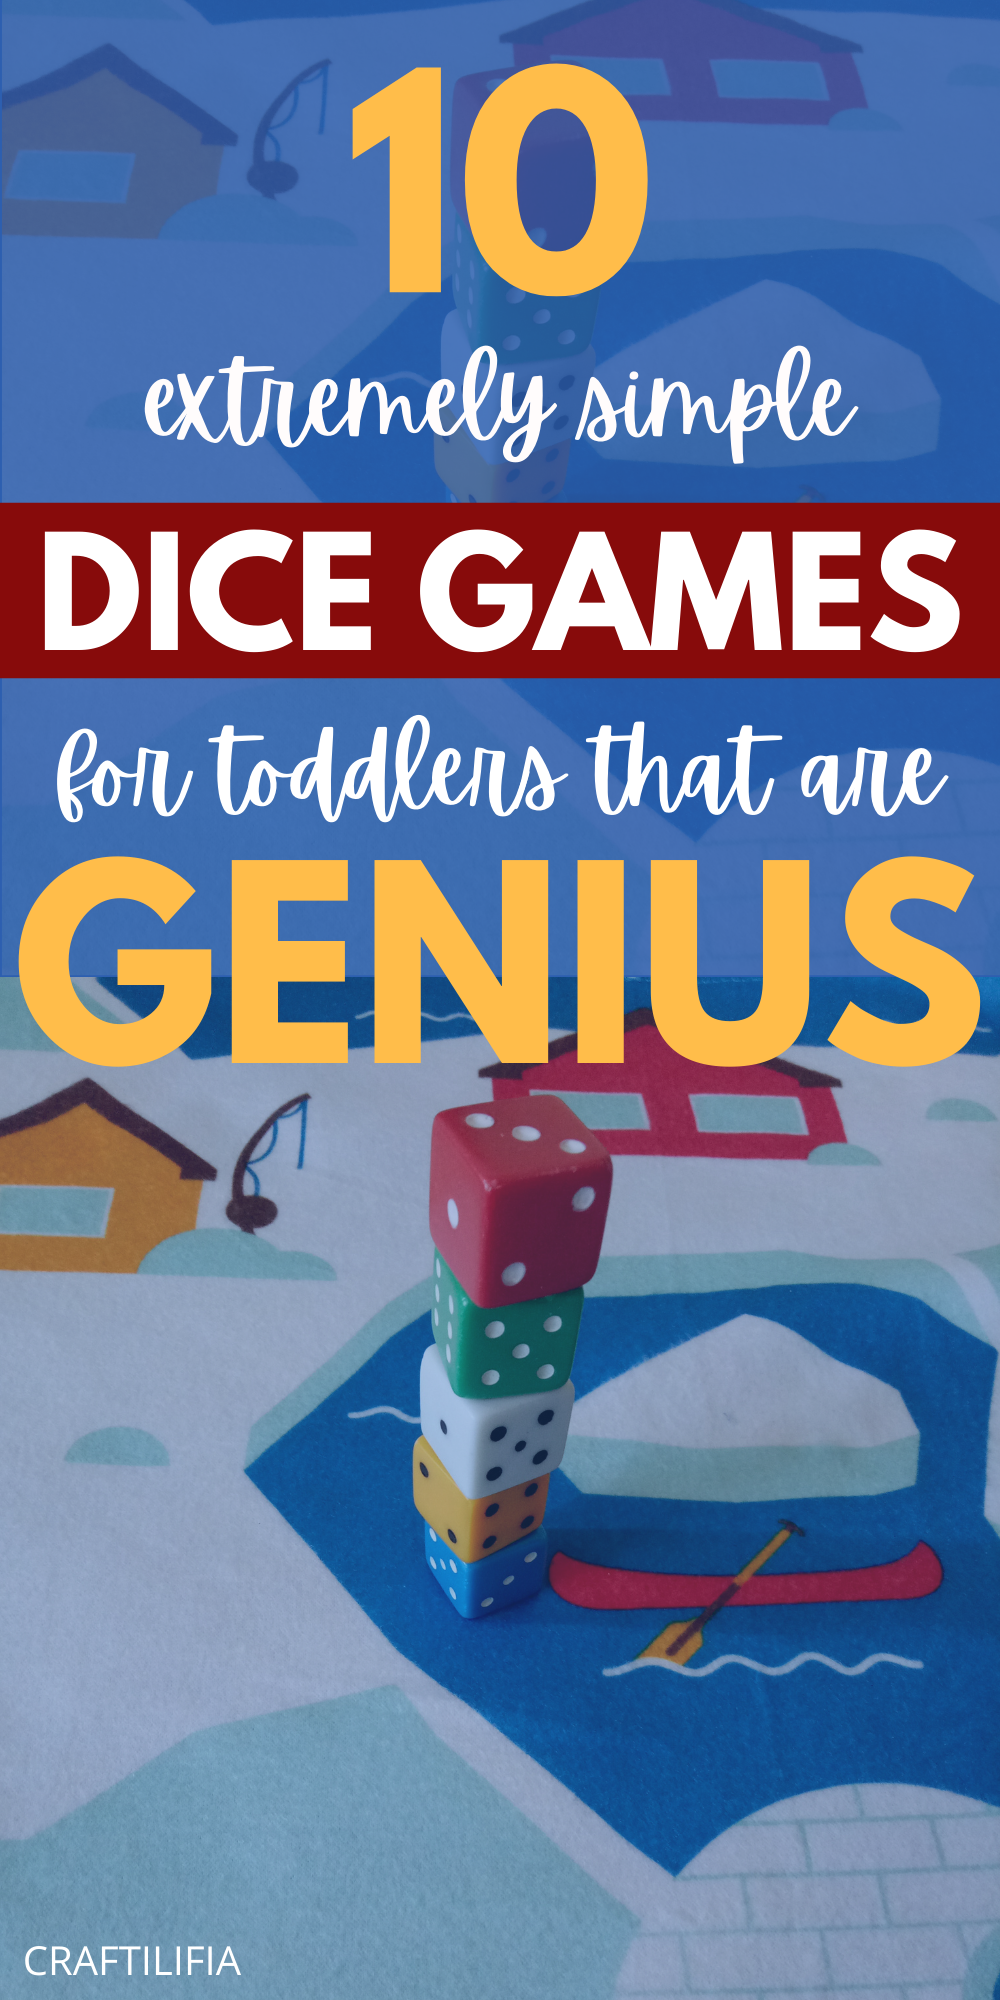 10 absolutely genius dice games for toddlers